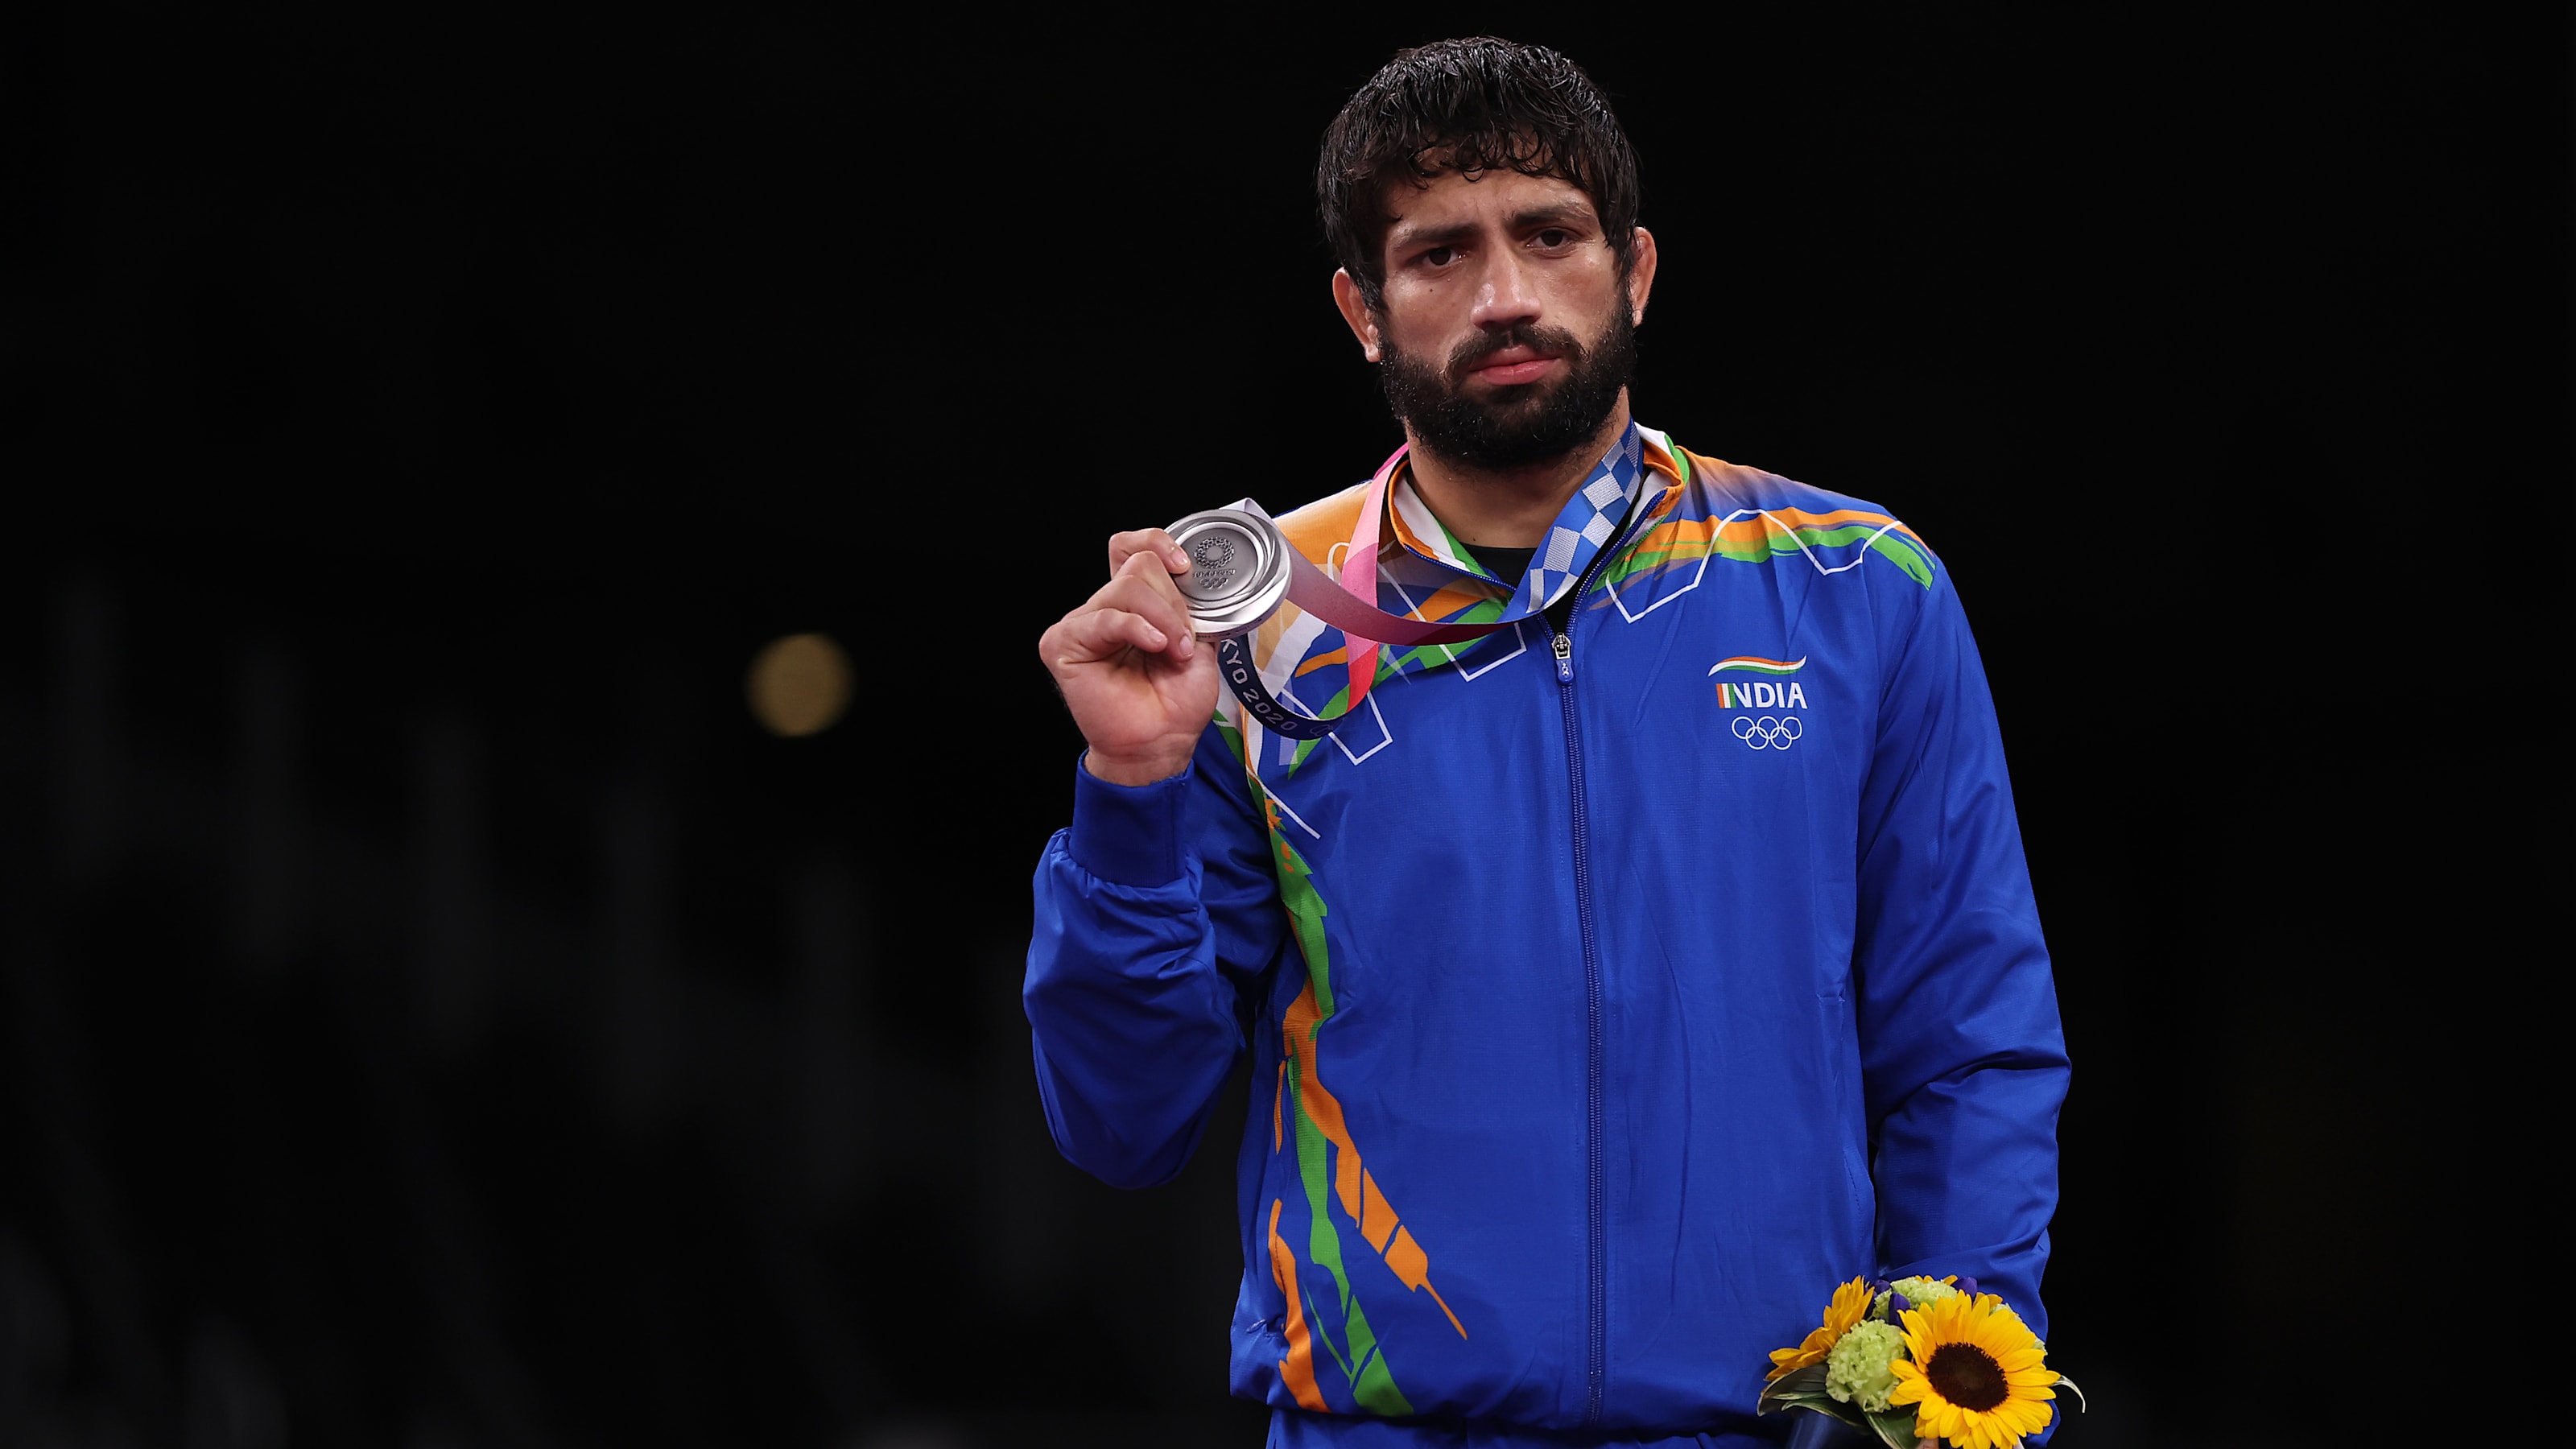 Olympic silver medalist Ravi Dahiya confident about winning gold at World Championship